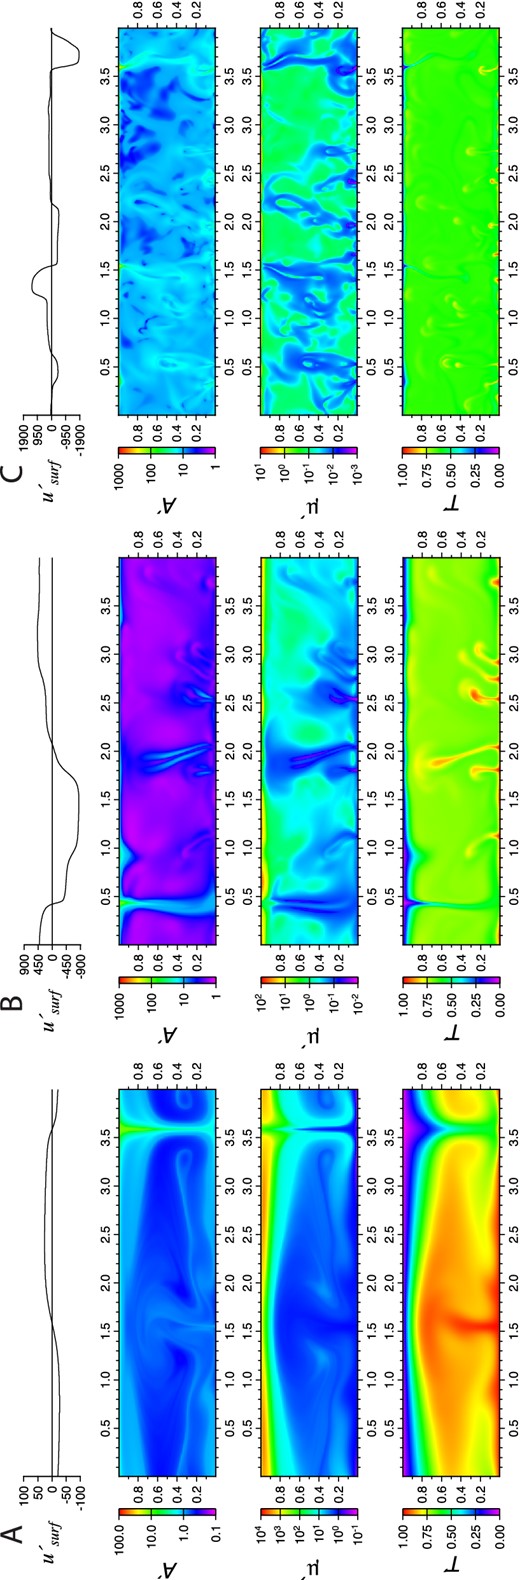 Snapshots of convection with temperature-dependent viscosity and healing (Section 5) in the transitional regime. Models use three different D/H values: D/H = 10−7 (a), D/H = 10−5 (b) and D/H = 10−3 (c). All models use Ra0 = 106, m = 2, p = 4, $E_v^{\prime } = E_h^{\prime }=23.03$ and $T_s^* = 1$. Each snapshot shows the surface velocity, $u^{\prime }_{{\rm surf}}$, the fineness field, A′, the viscosity field, μ′ and the temperature field, T′.